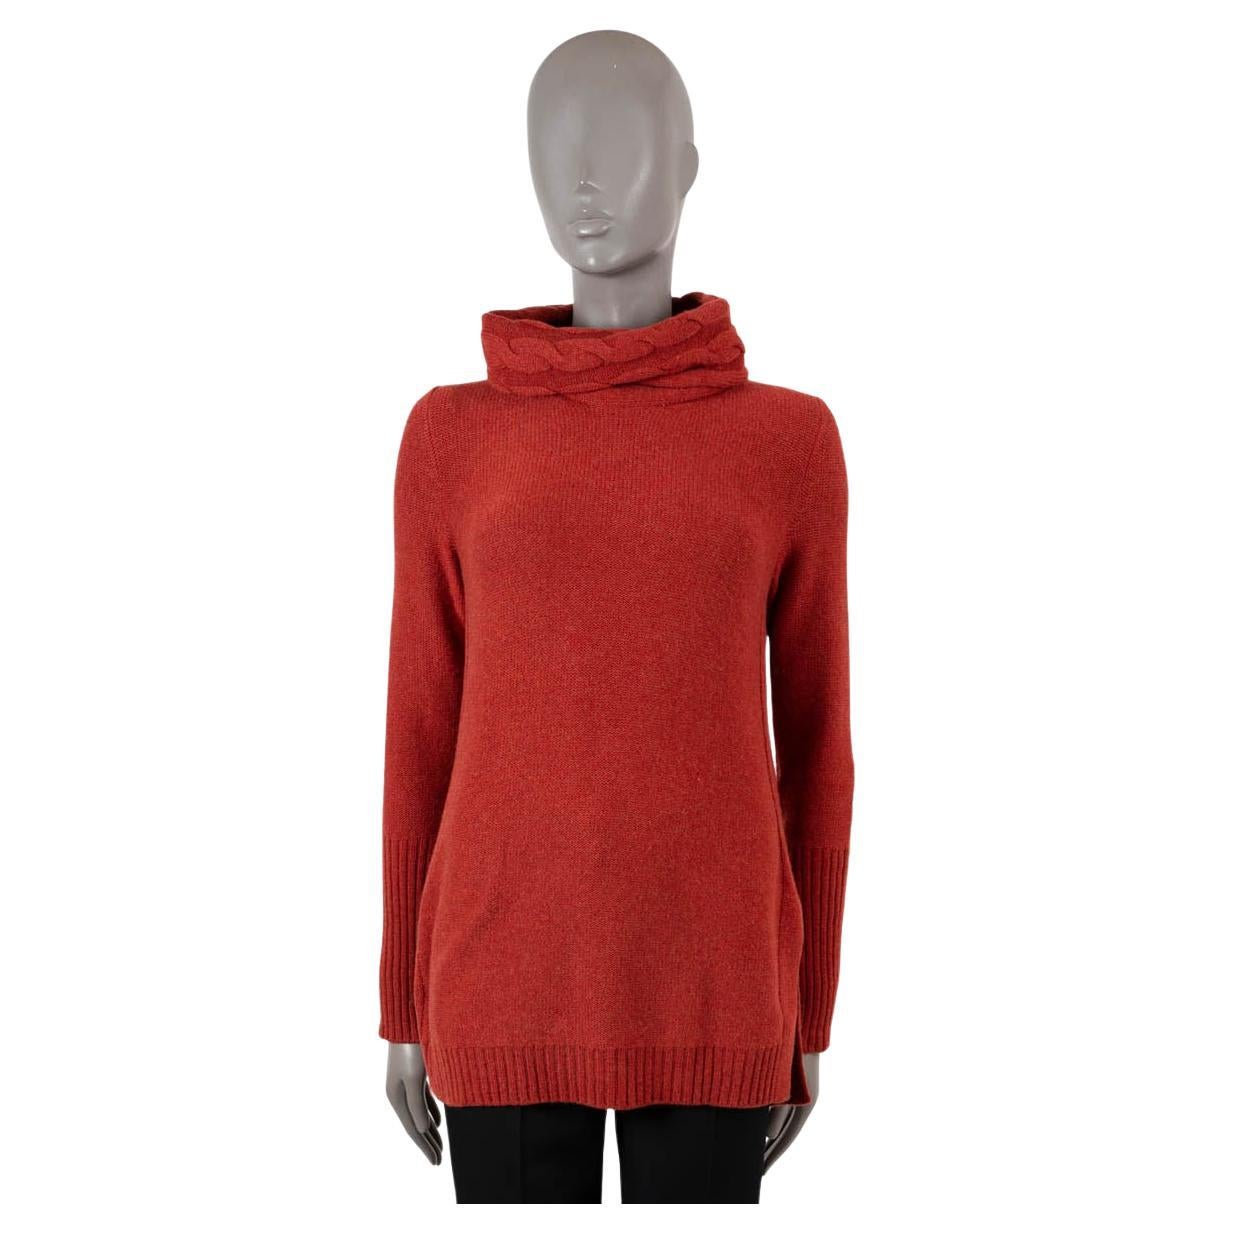 LORO PIANA coral red cashmere KIMBERLEY COWL NECK Sweater 40 S